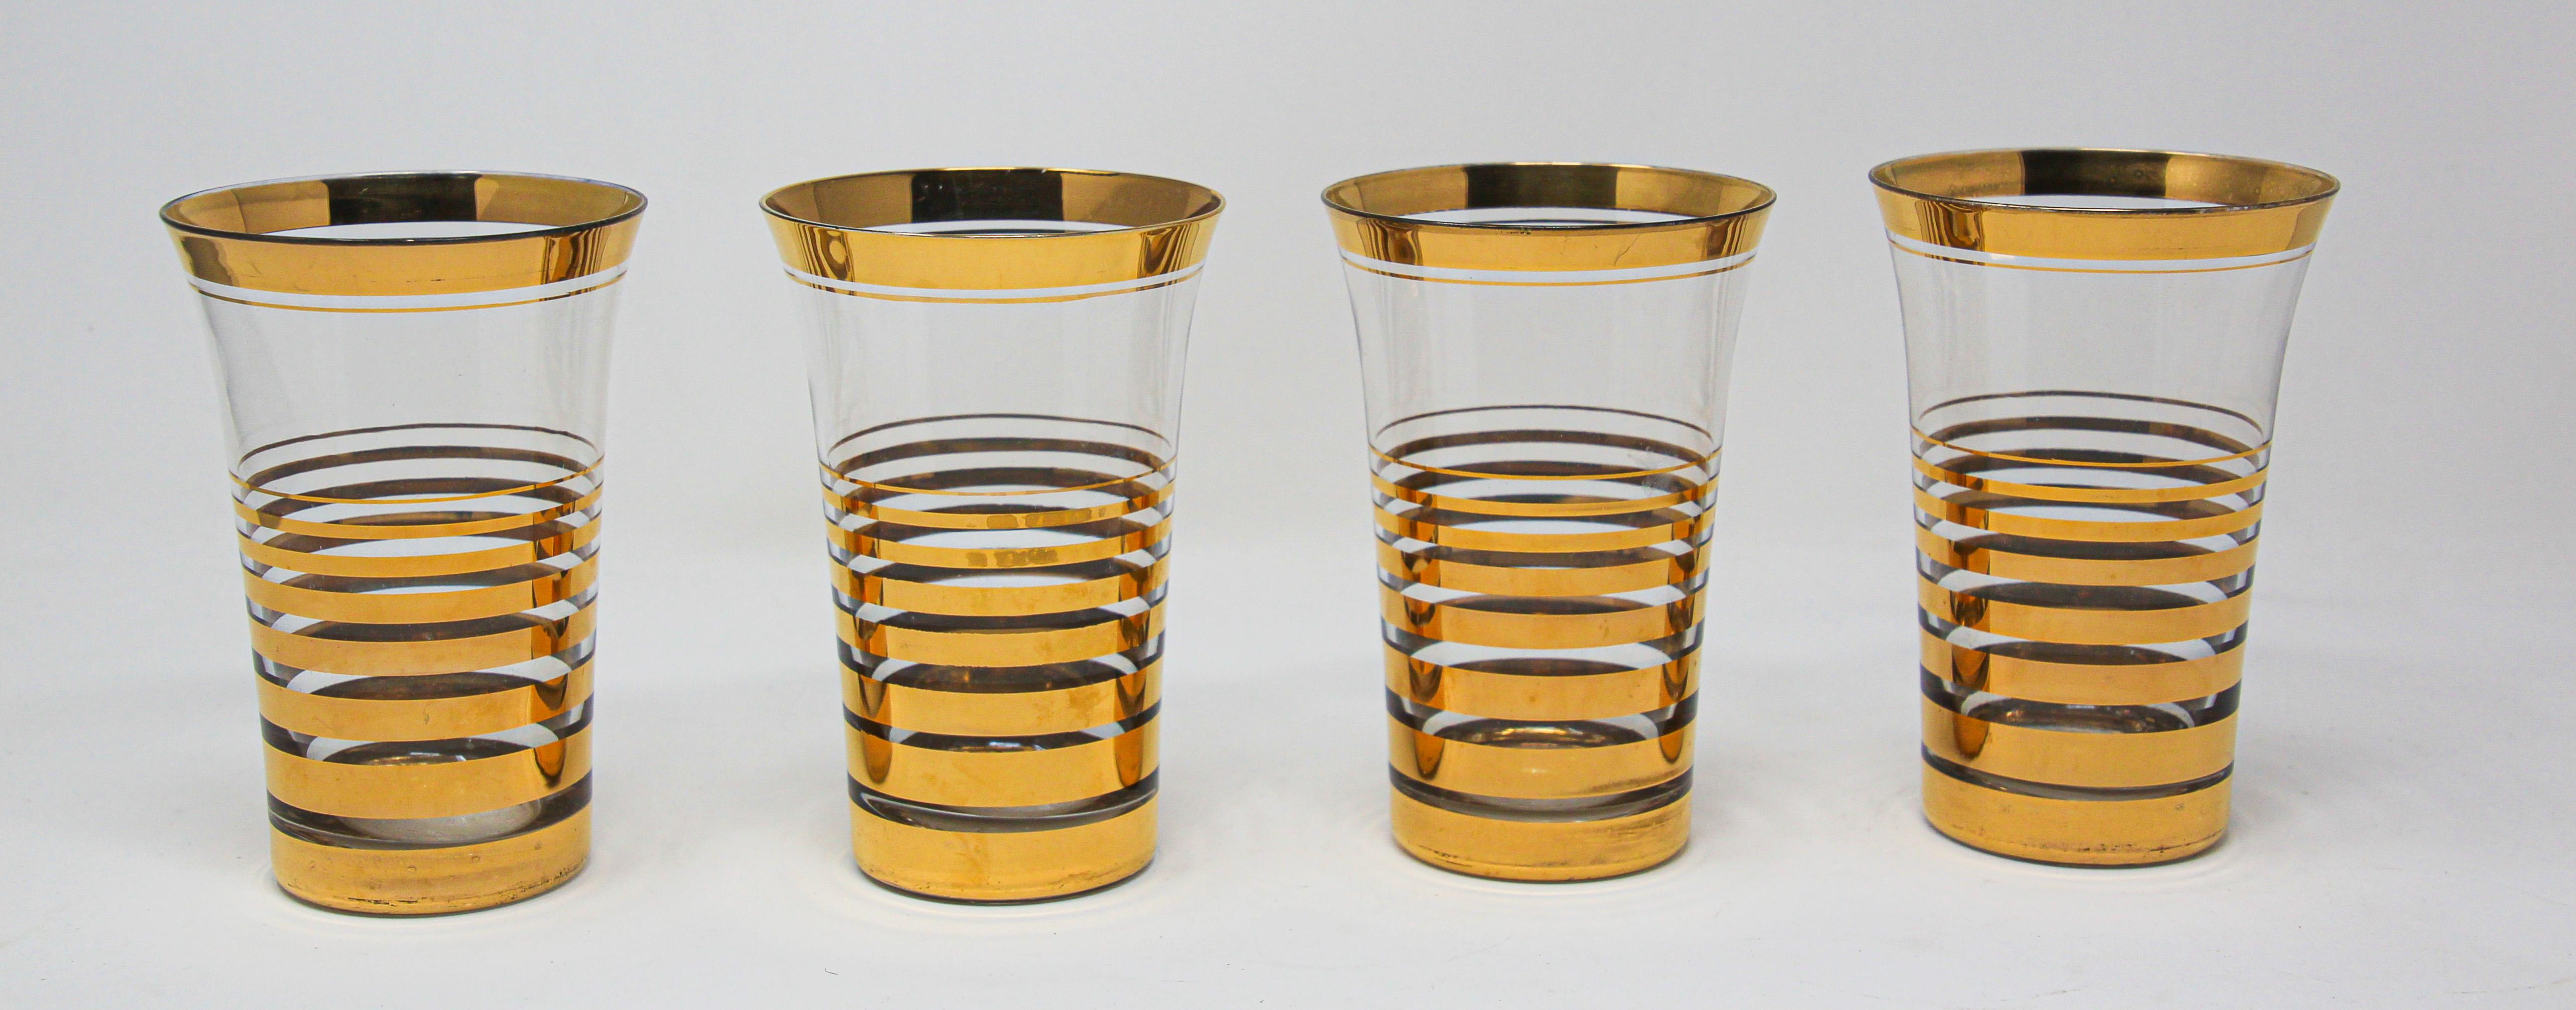 Elegant vintage French barware cocktail glasses with a pattern in a gold leaf finish.
Set includes 4 cocktail glasses in Moser style design.
This fabulous elegant set of barware with 22-carat gold decoration is decorated in a simple pattern in